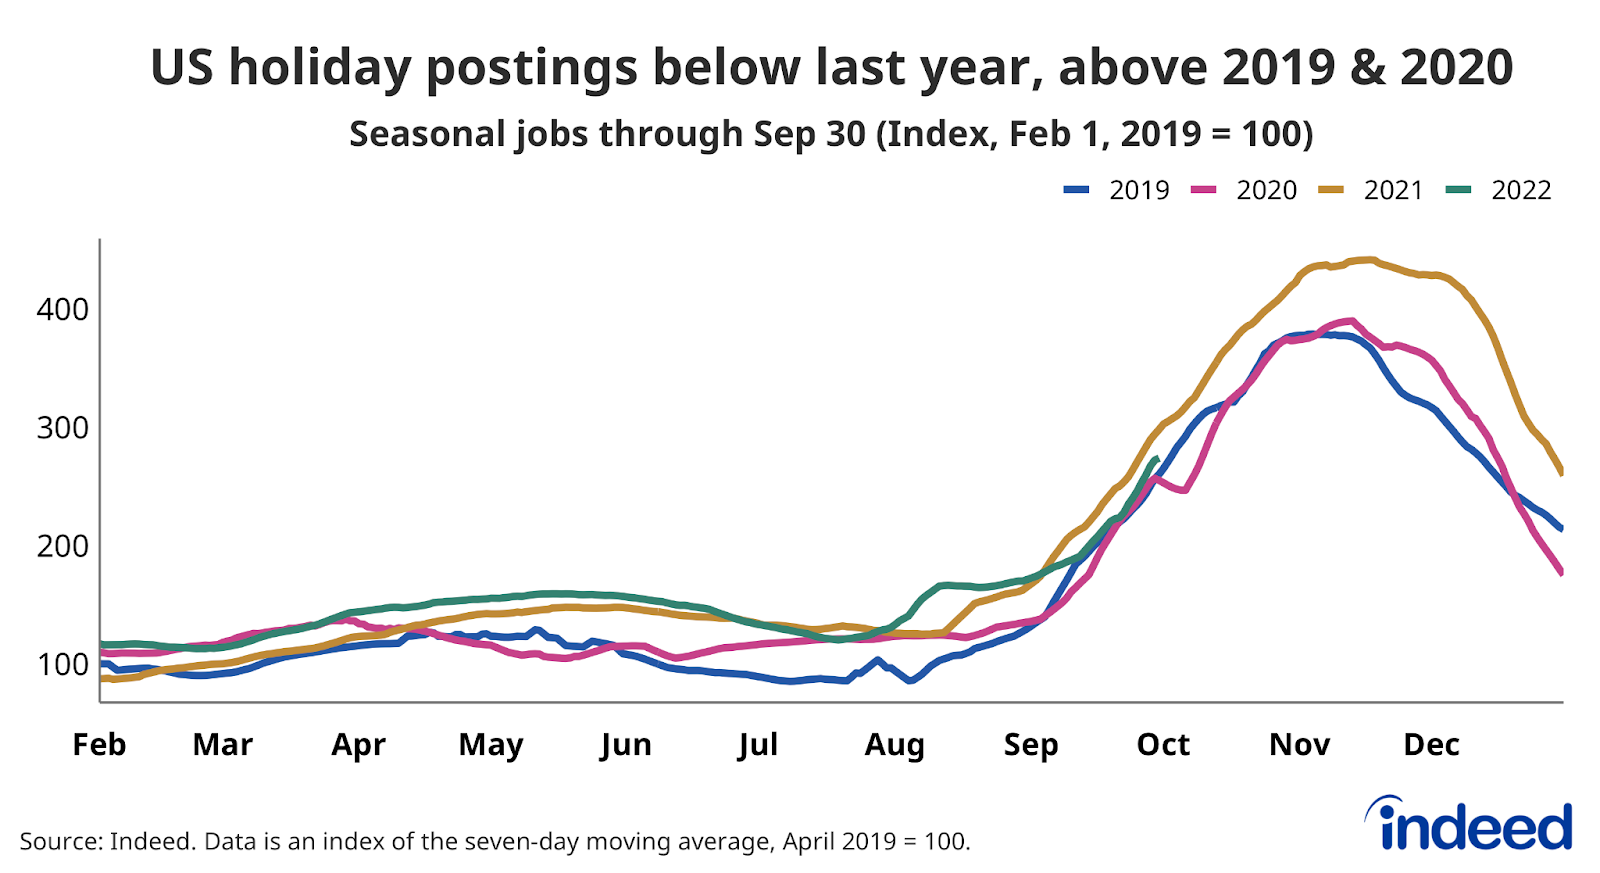 Line graph titled “US holiday postings below last year, above 2019 & 2020.” 